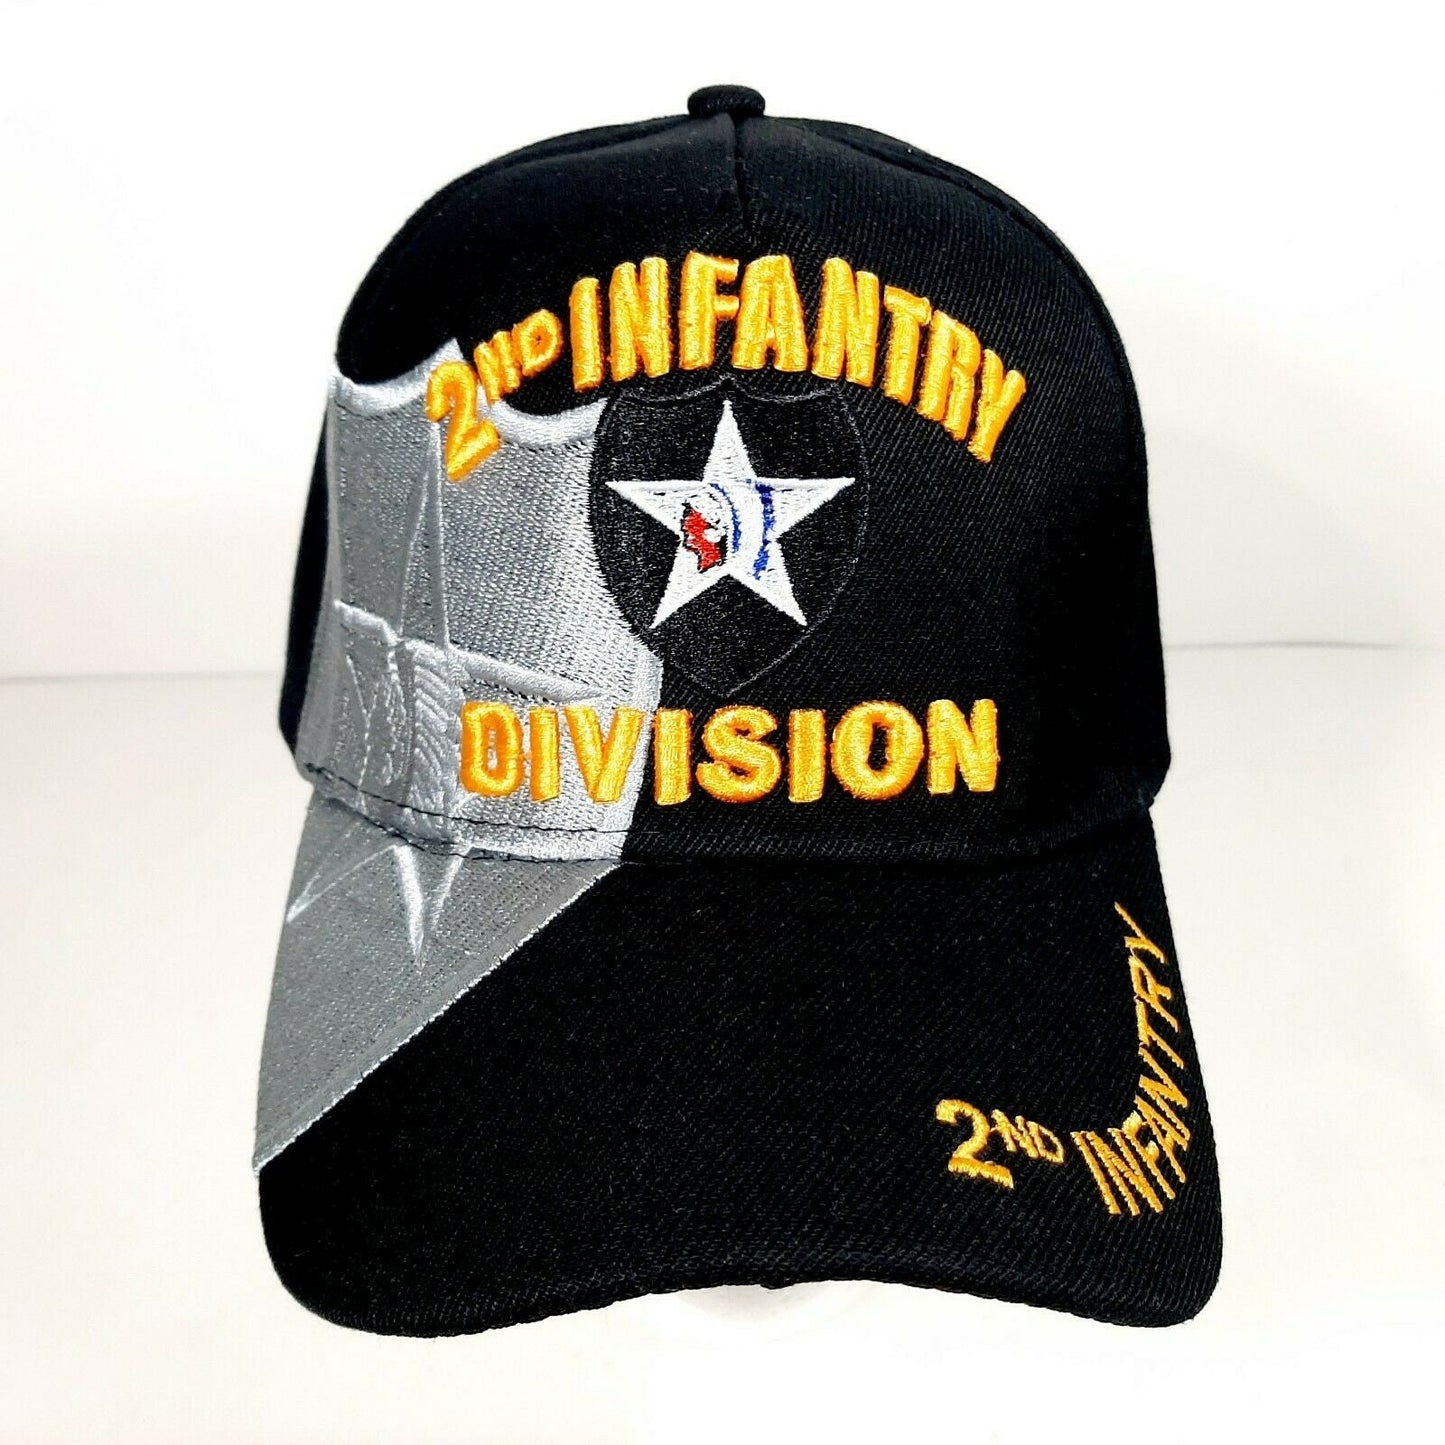 US Army 2nd Infantry Division Men's Ball Cap Hat Black Embroidered Acrylic